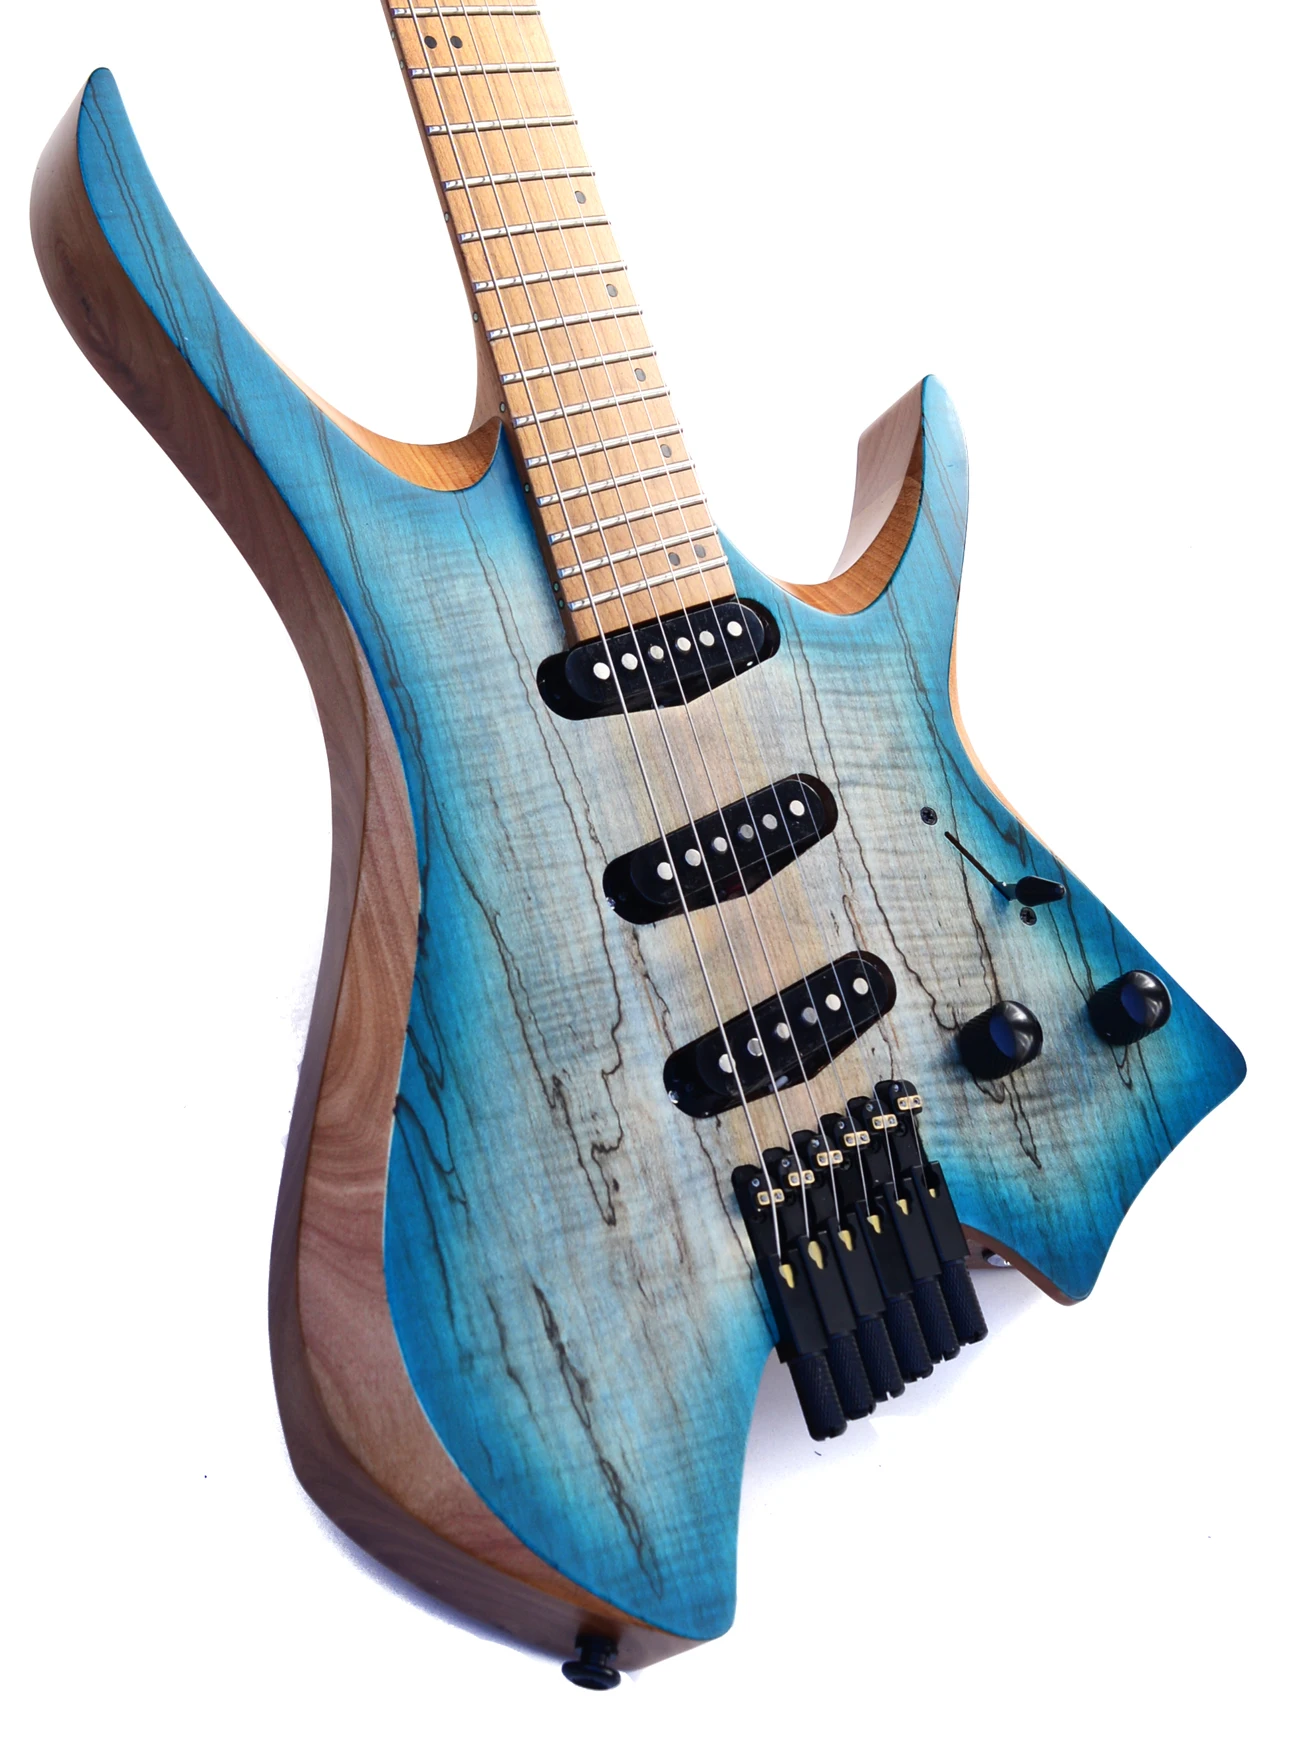 2021 NK Fanned frets 6 Strings Headless Electric Guitar Blue color Roasted Maple Neck Cat paw inlay